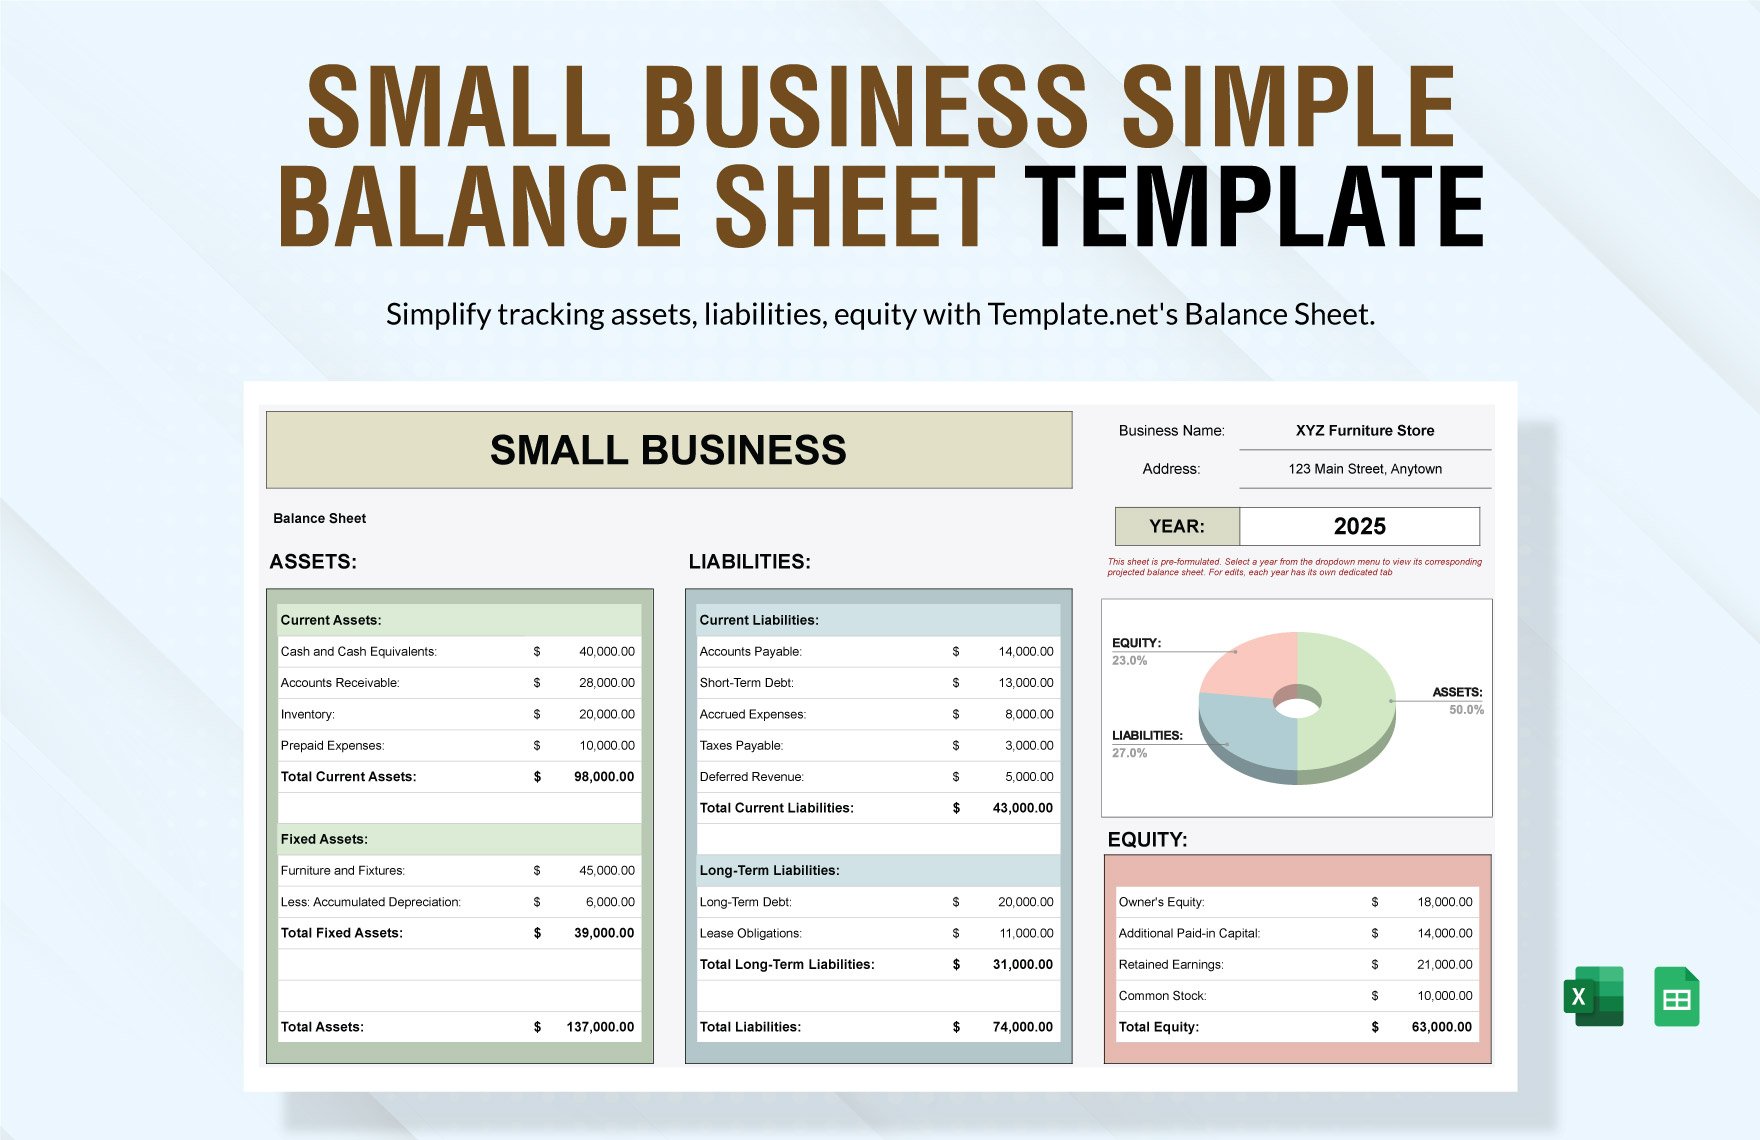 Small Business Simple Balance Sheet Template in Excel, Google Sheets